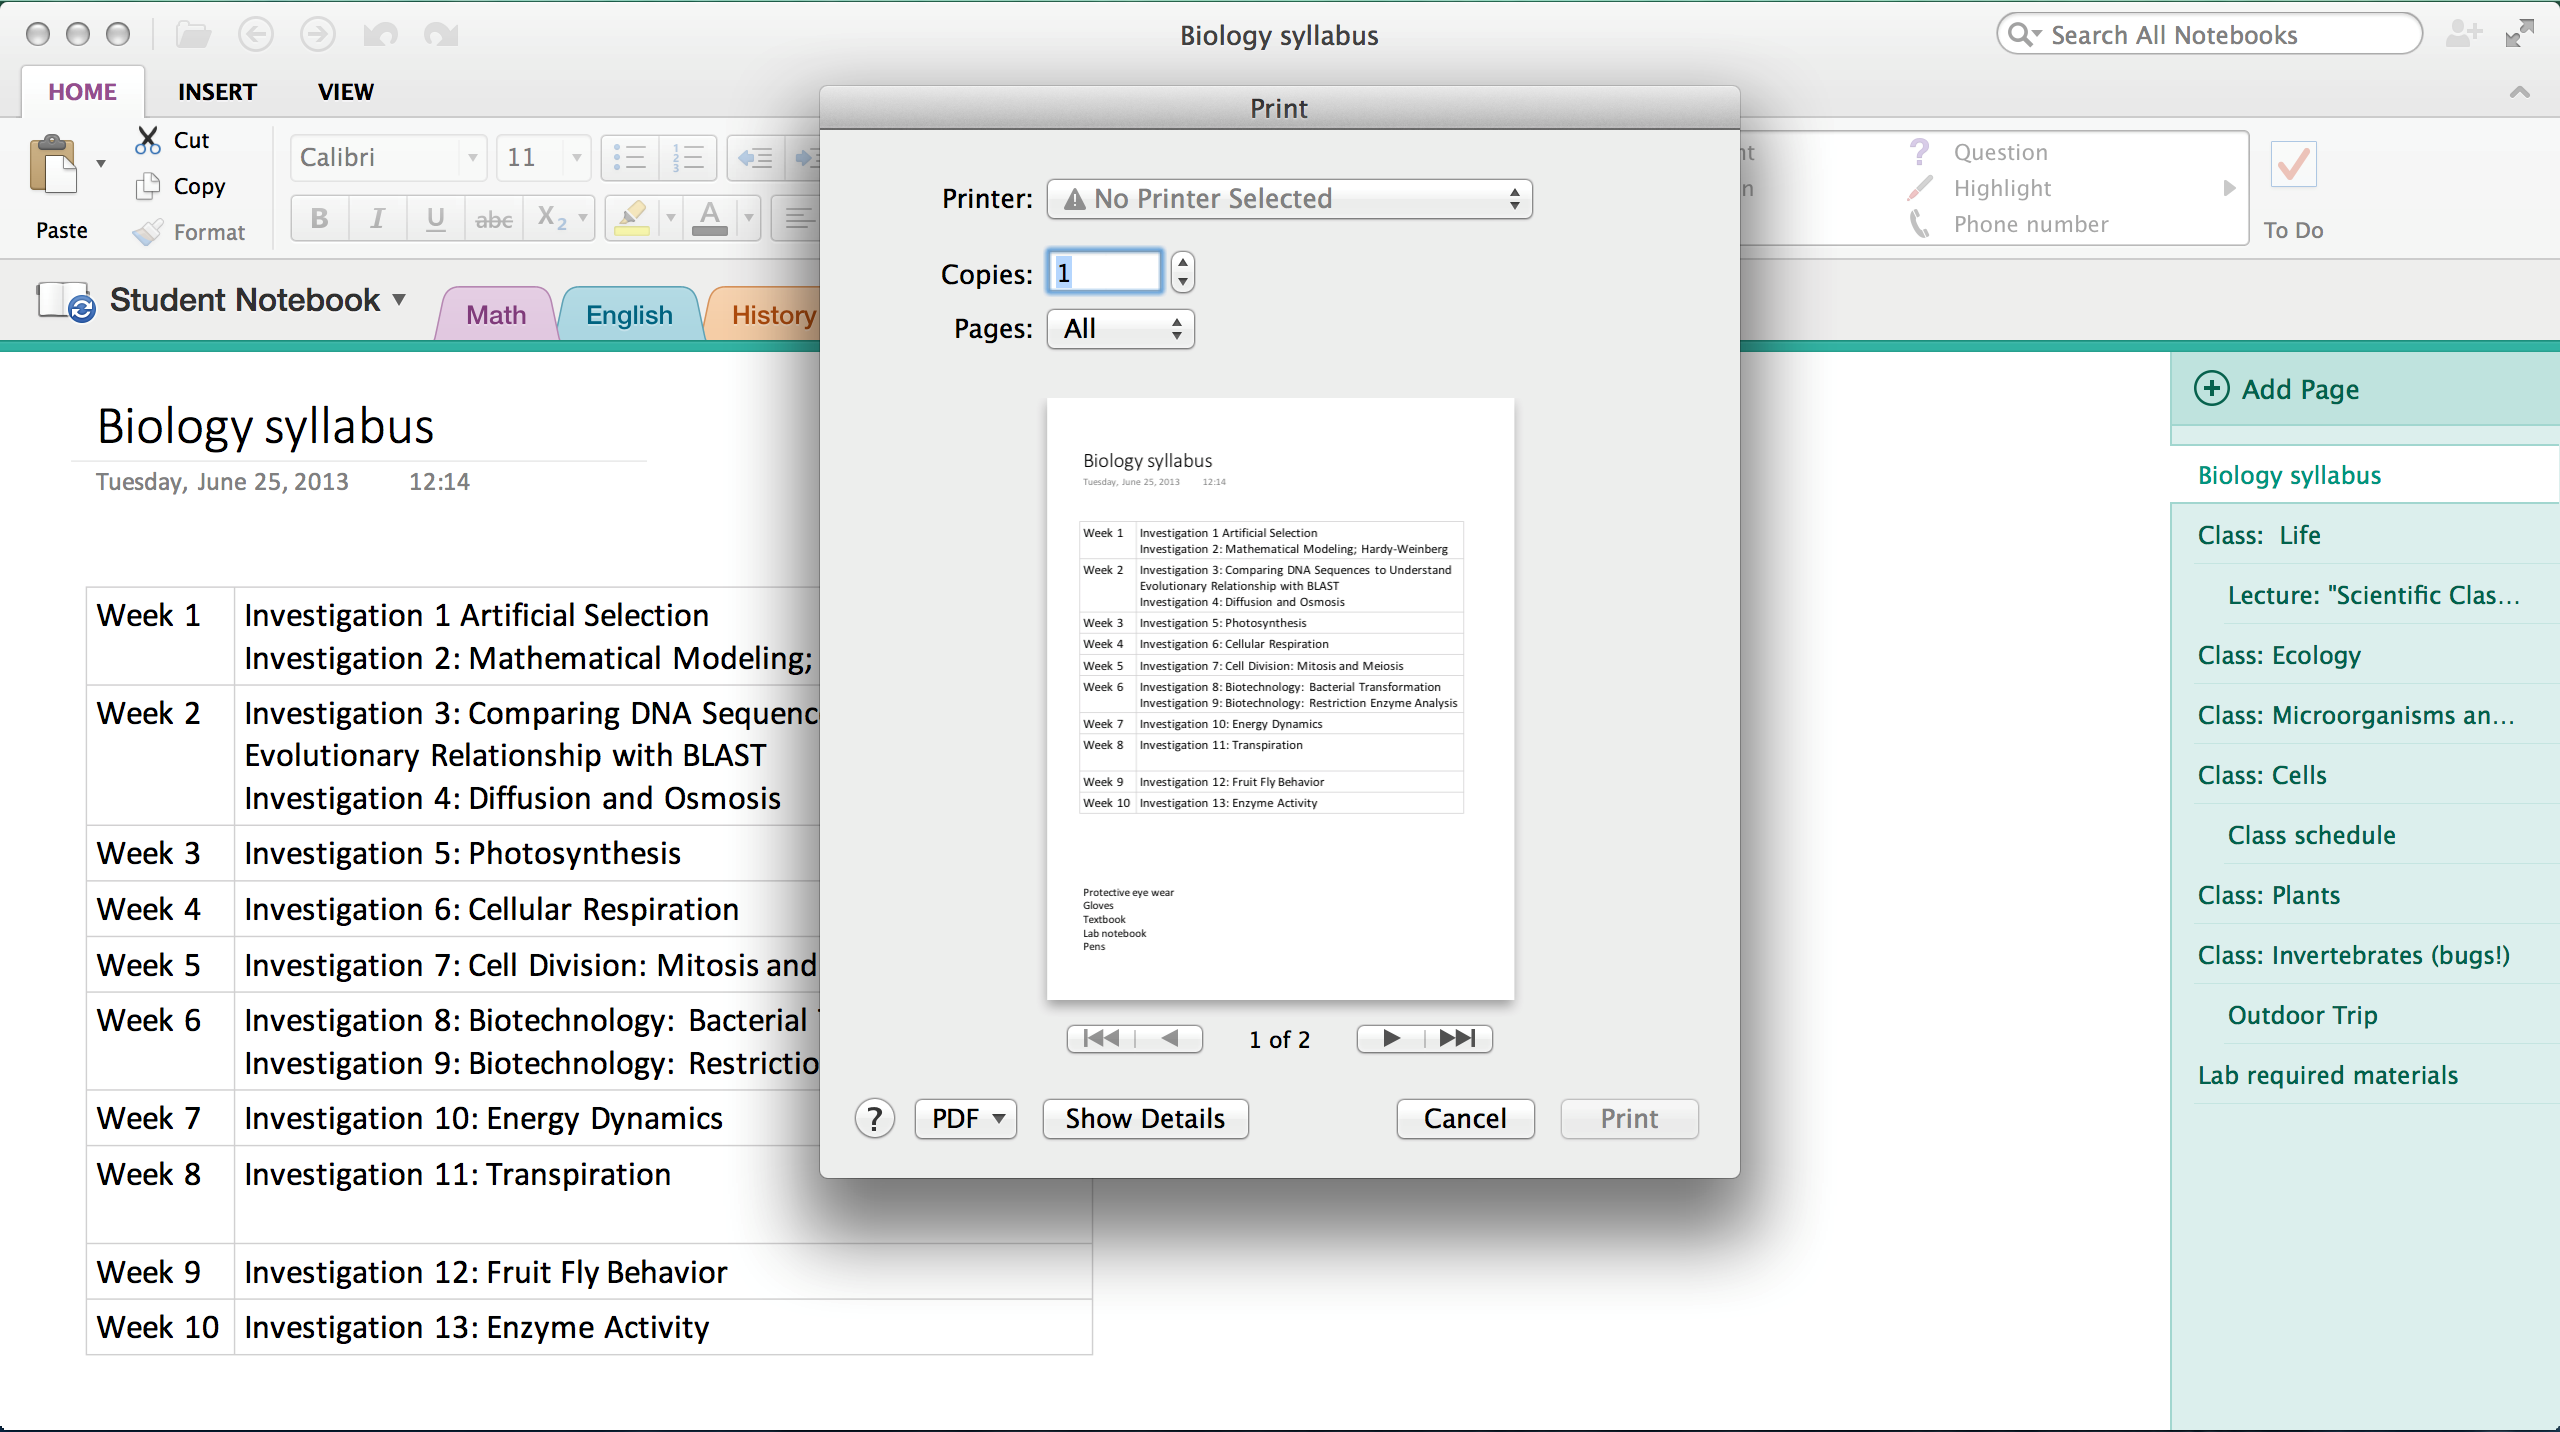 free download microsoft office for mac